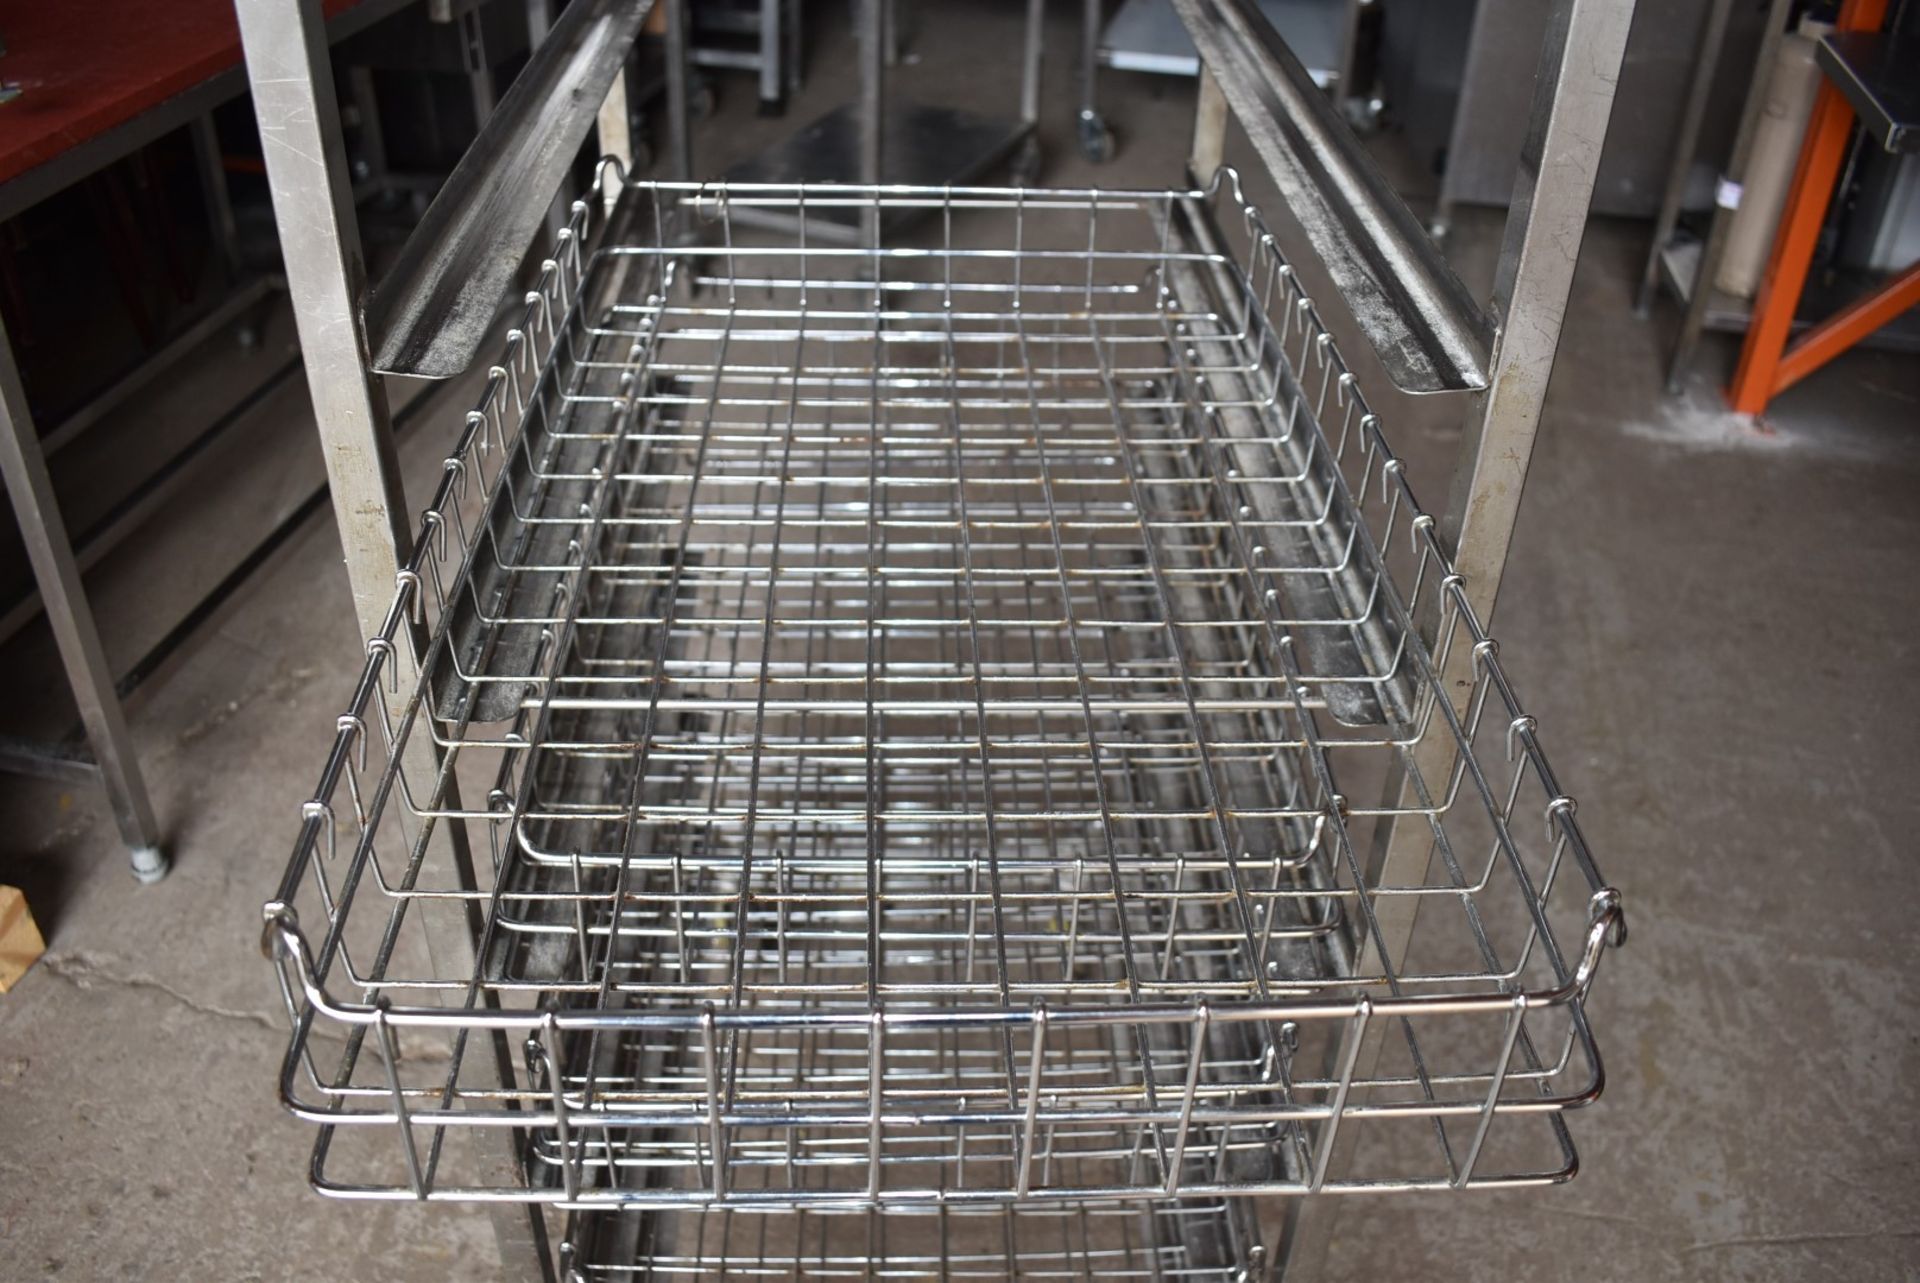 1 x Bakers 11 Tier Mobile Tray Rack With 7 Removable Wire Baskets - Stainless Steel With Castors - - Image 7 of 8